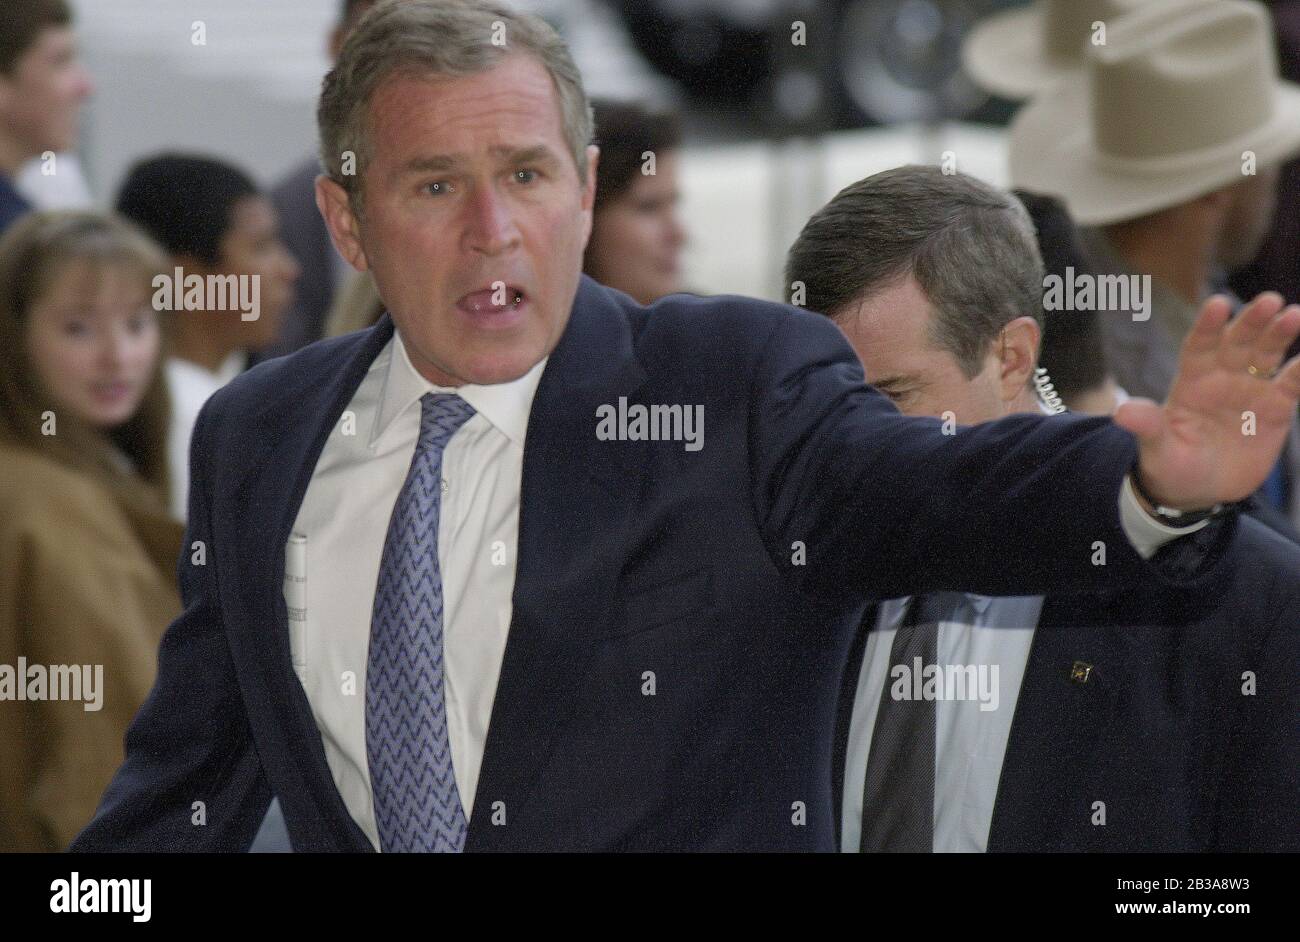 Austin, Texas USA, 22 NOV 2000: Texas governor and Republican presidential nominee George W. Bush arrives at the Texas Capitol to make a statement to the press following the Florida Supreme Court ruling in favor of ballot recounts in the U.S. presidential election. ©Bob Daemmrich Stock Photo